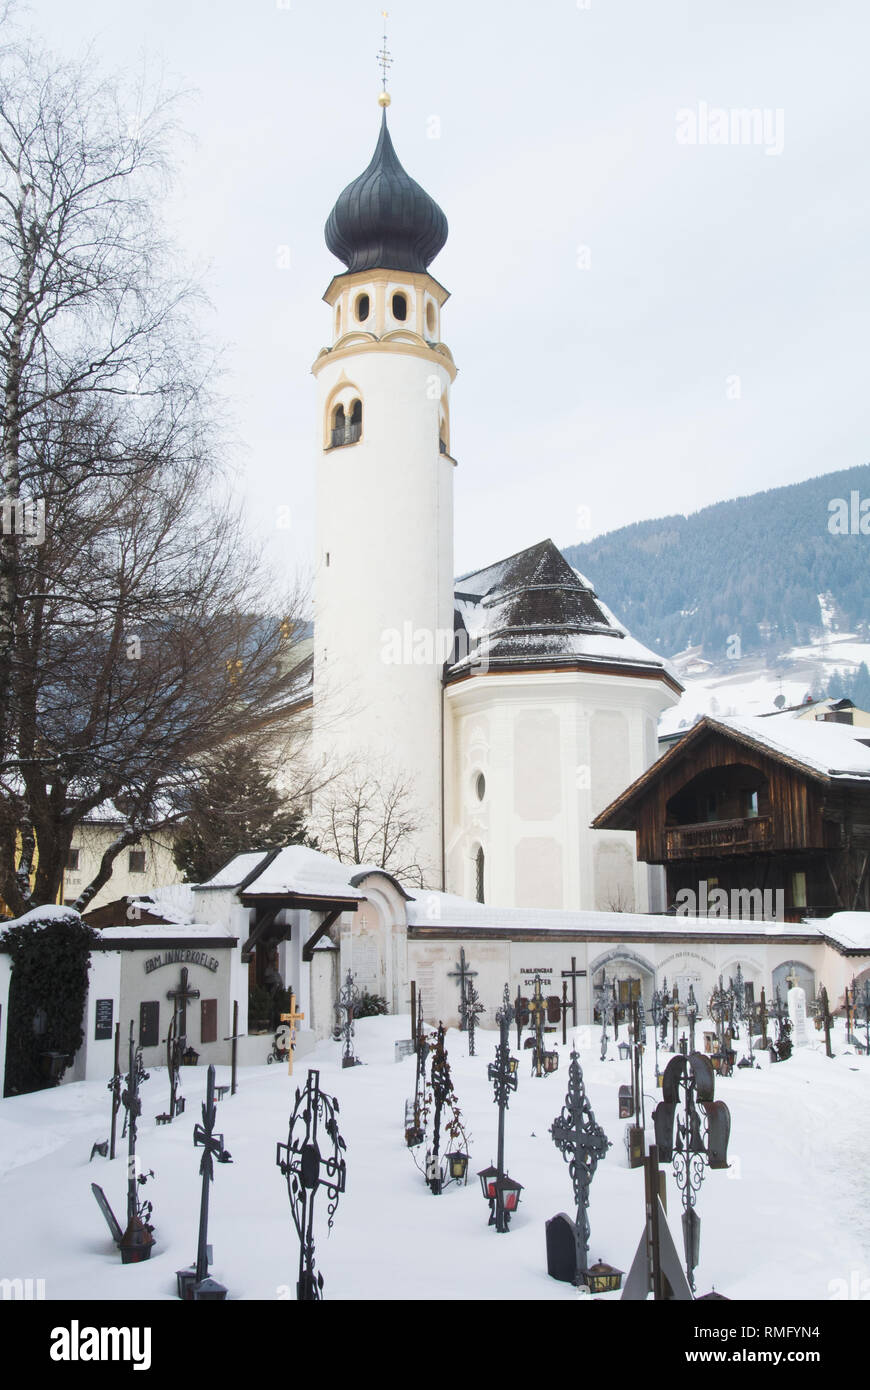 Church of St Michael, Innichen/San Candido, South Tyrol, Italy Stock Photo